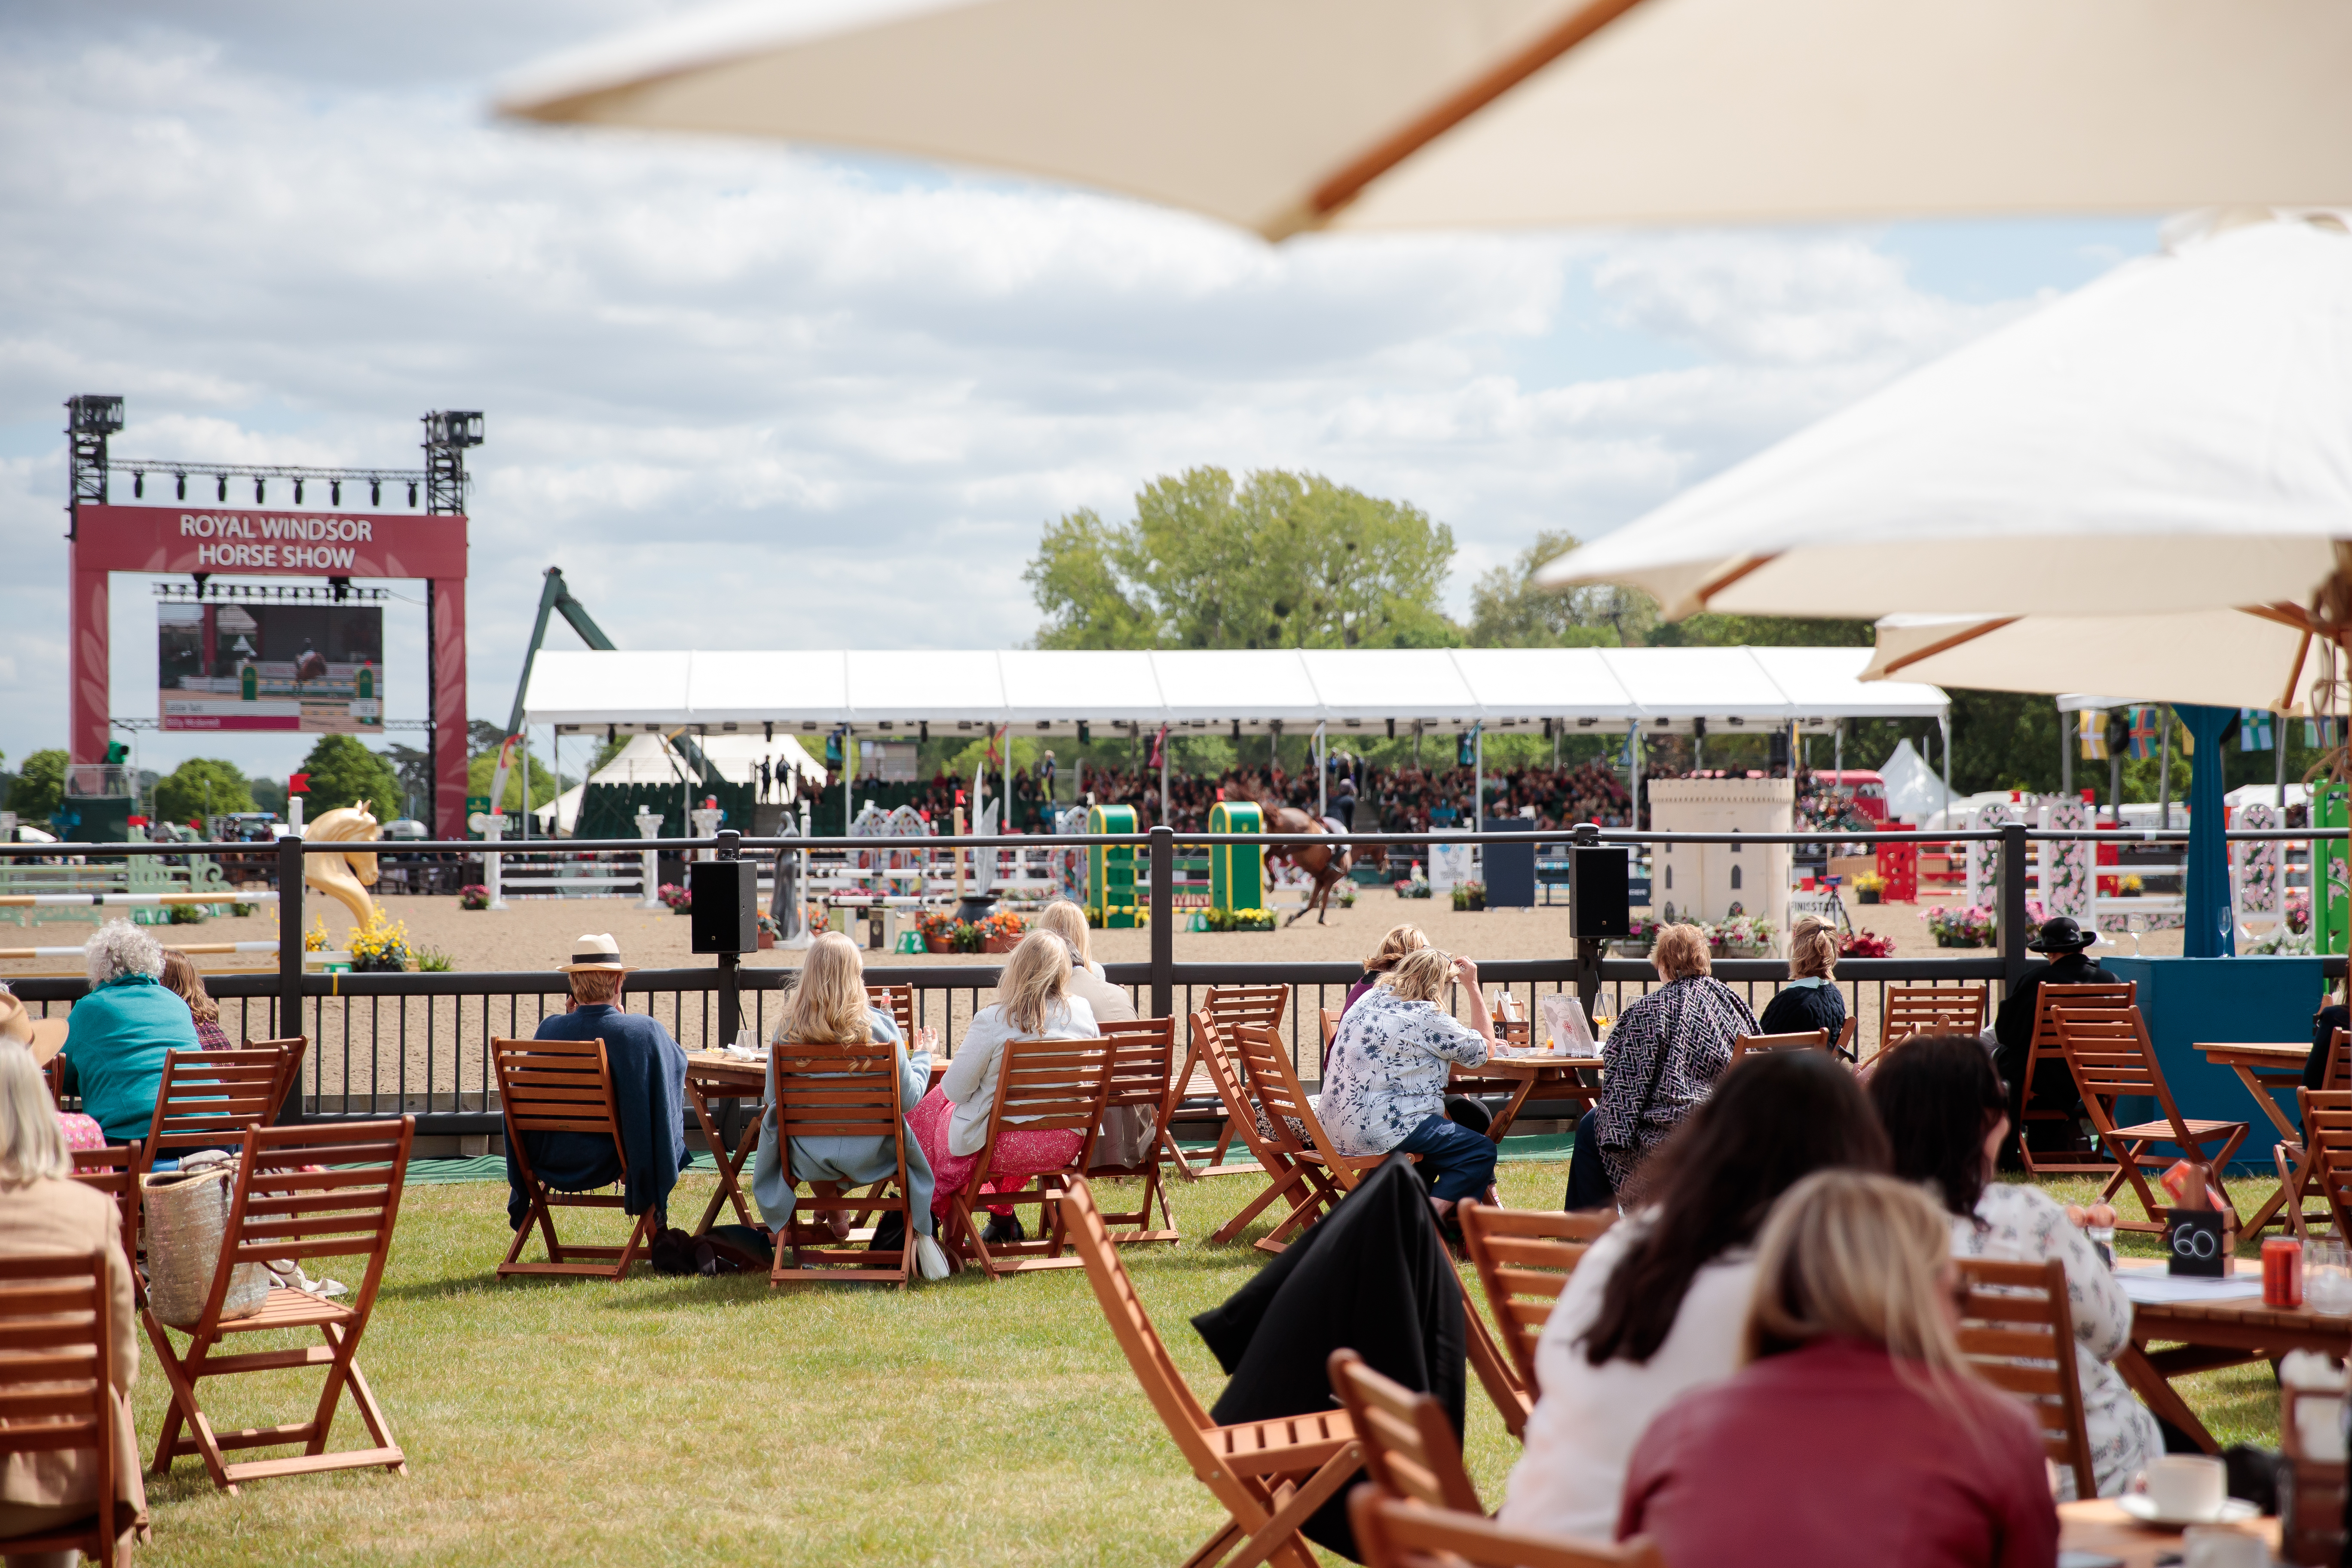 Royal Windsor Horse Show and The Platinum Jubilee Celebration to be catered by Royal Warrant holders, Mosimann’s London Image